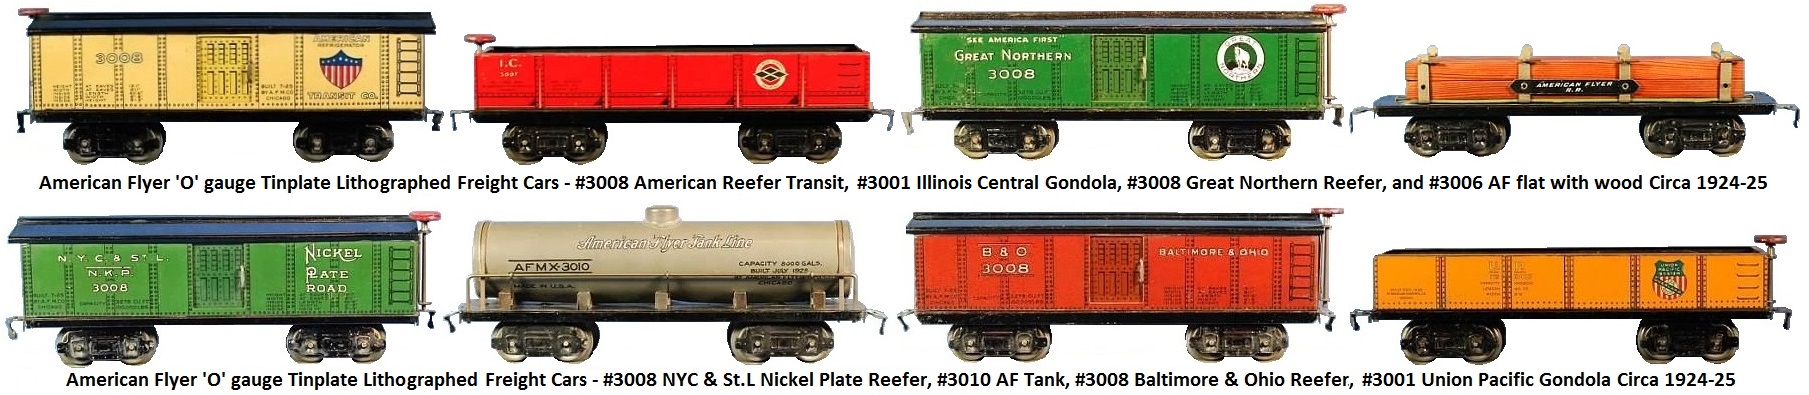 American Flyer 'O' gauge tinplate lithographed 9½ inch freight cars - #3008 American Reefer Transit refrigerator car, #3001 Illinois Central gondola, #3008 Great Northern See America First Reefer, #3006 American Flyer RR flat car, #3008 NYC & St.L Nickel Plate reefer, #3010 American Flyer Tank Line tank car, #3008 Baltimore & Ohio reefer and #3001 Union Pacific gondola circa 1924-25